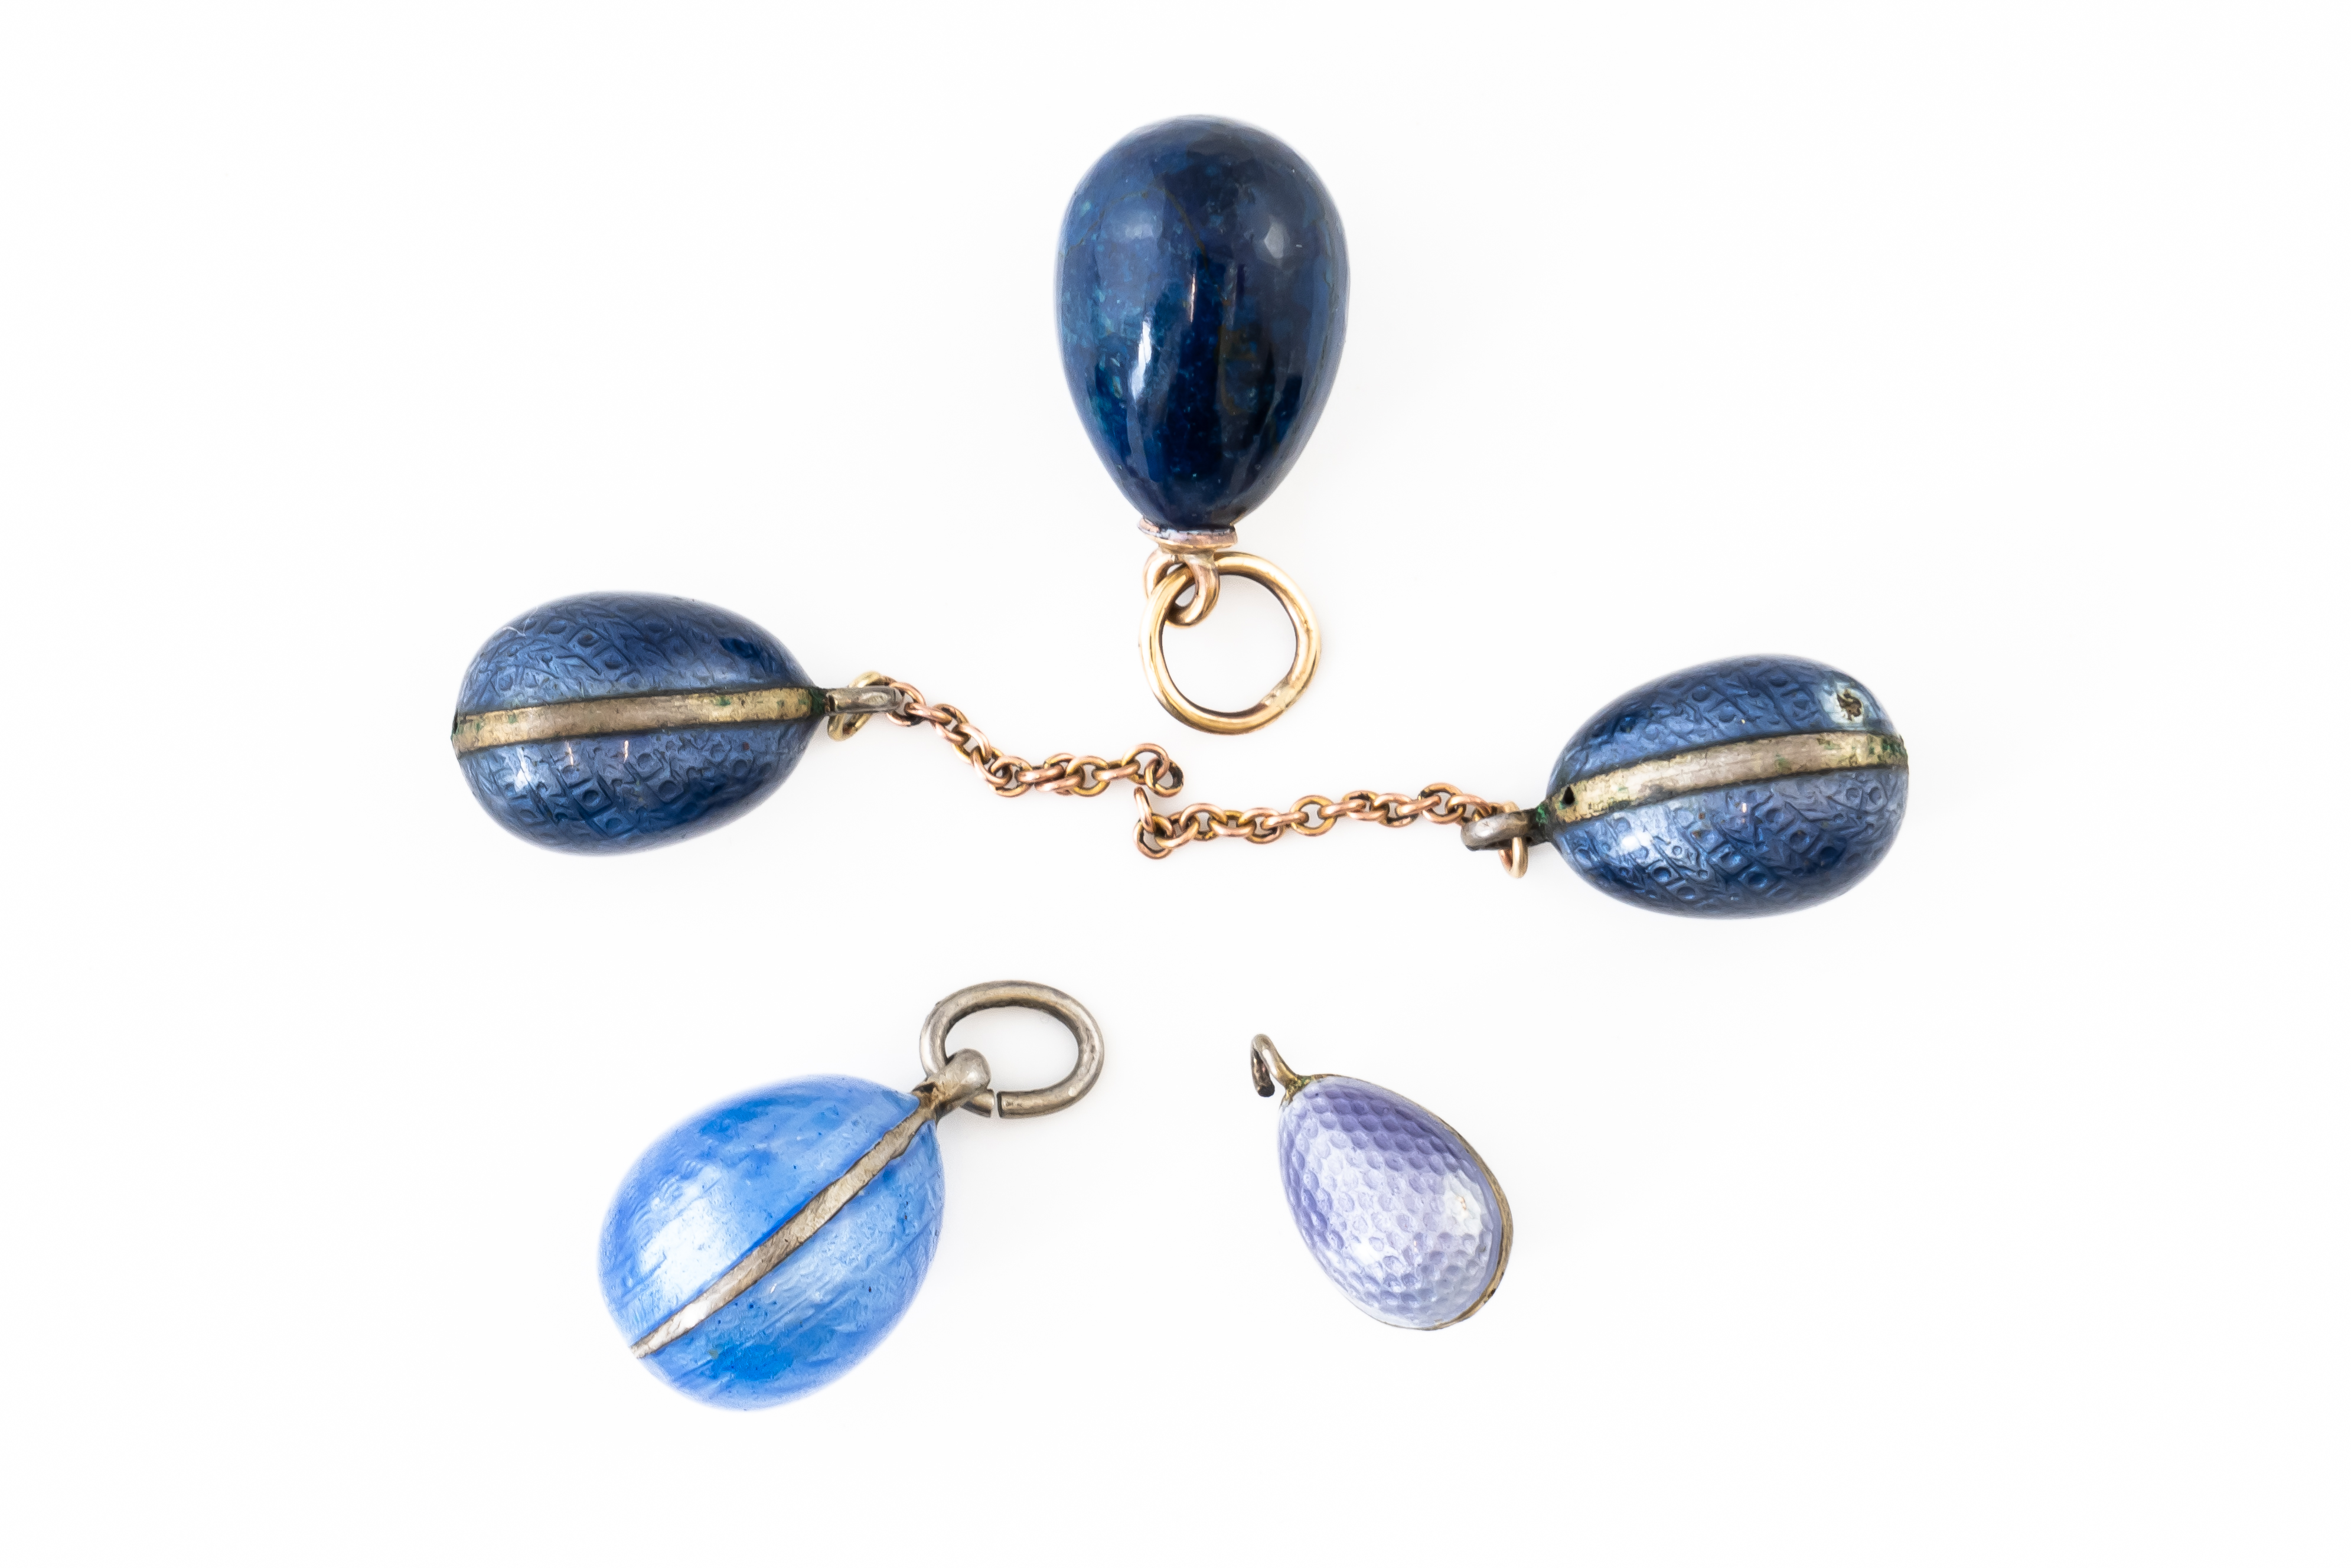 A GROUP OF FIVE BLUE EGG CHARMS (5)